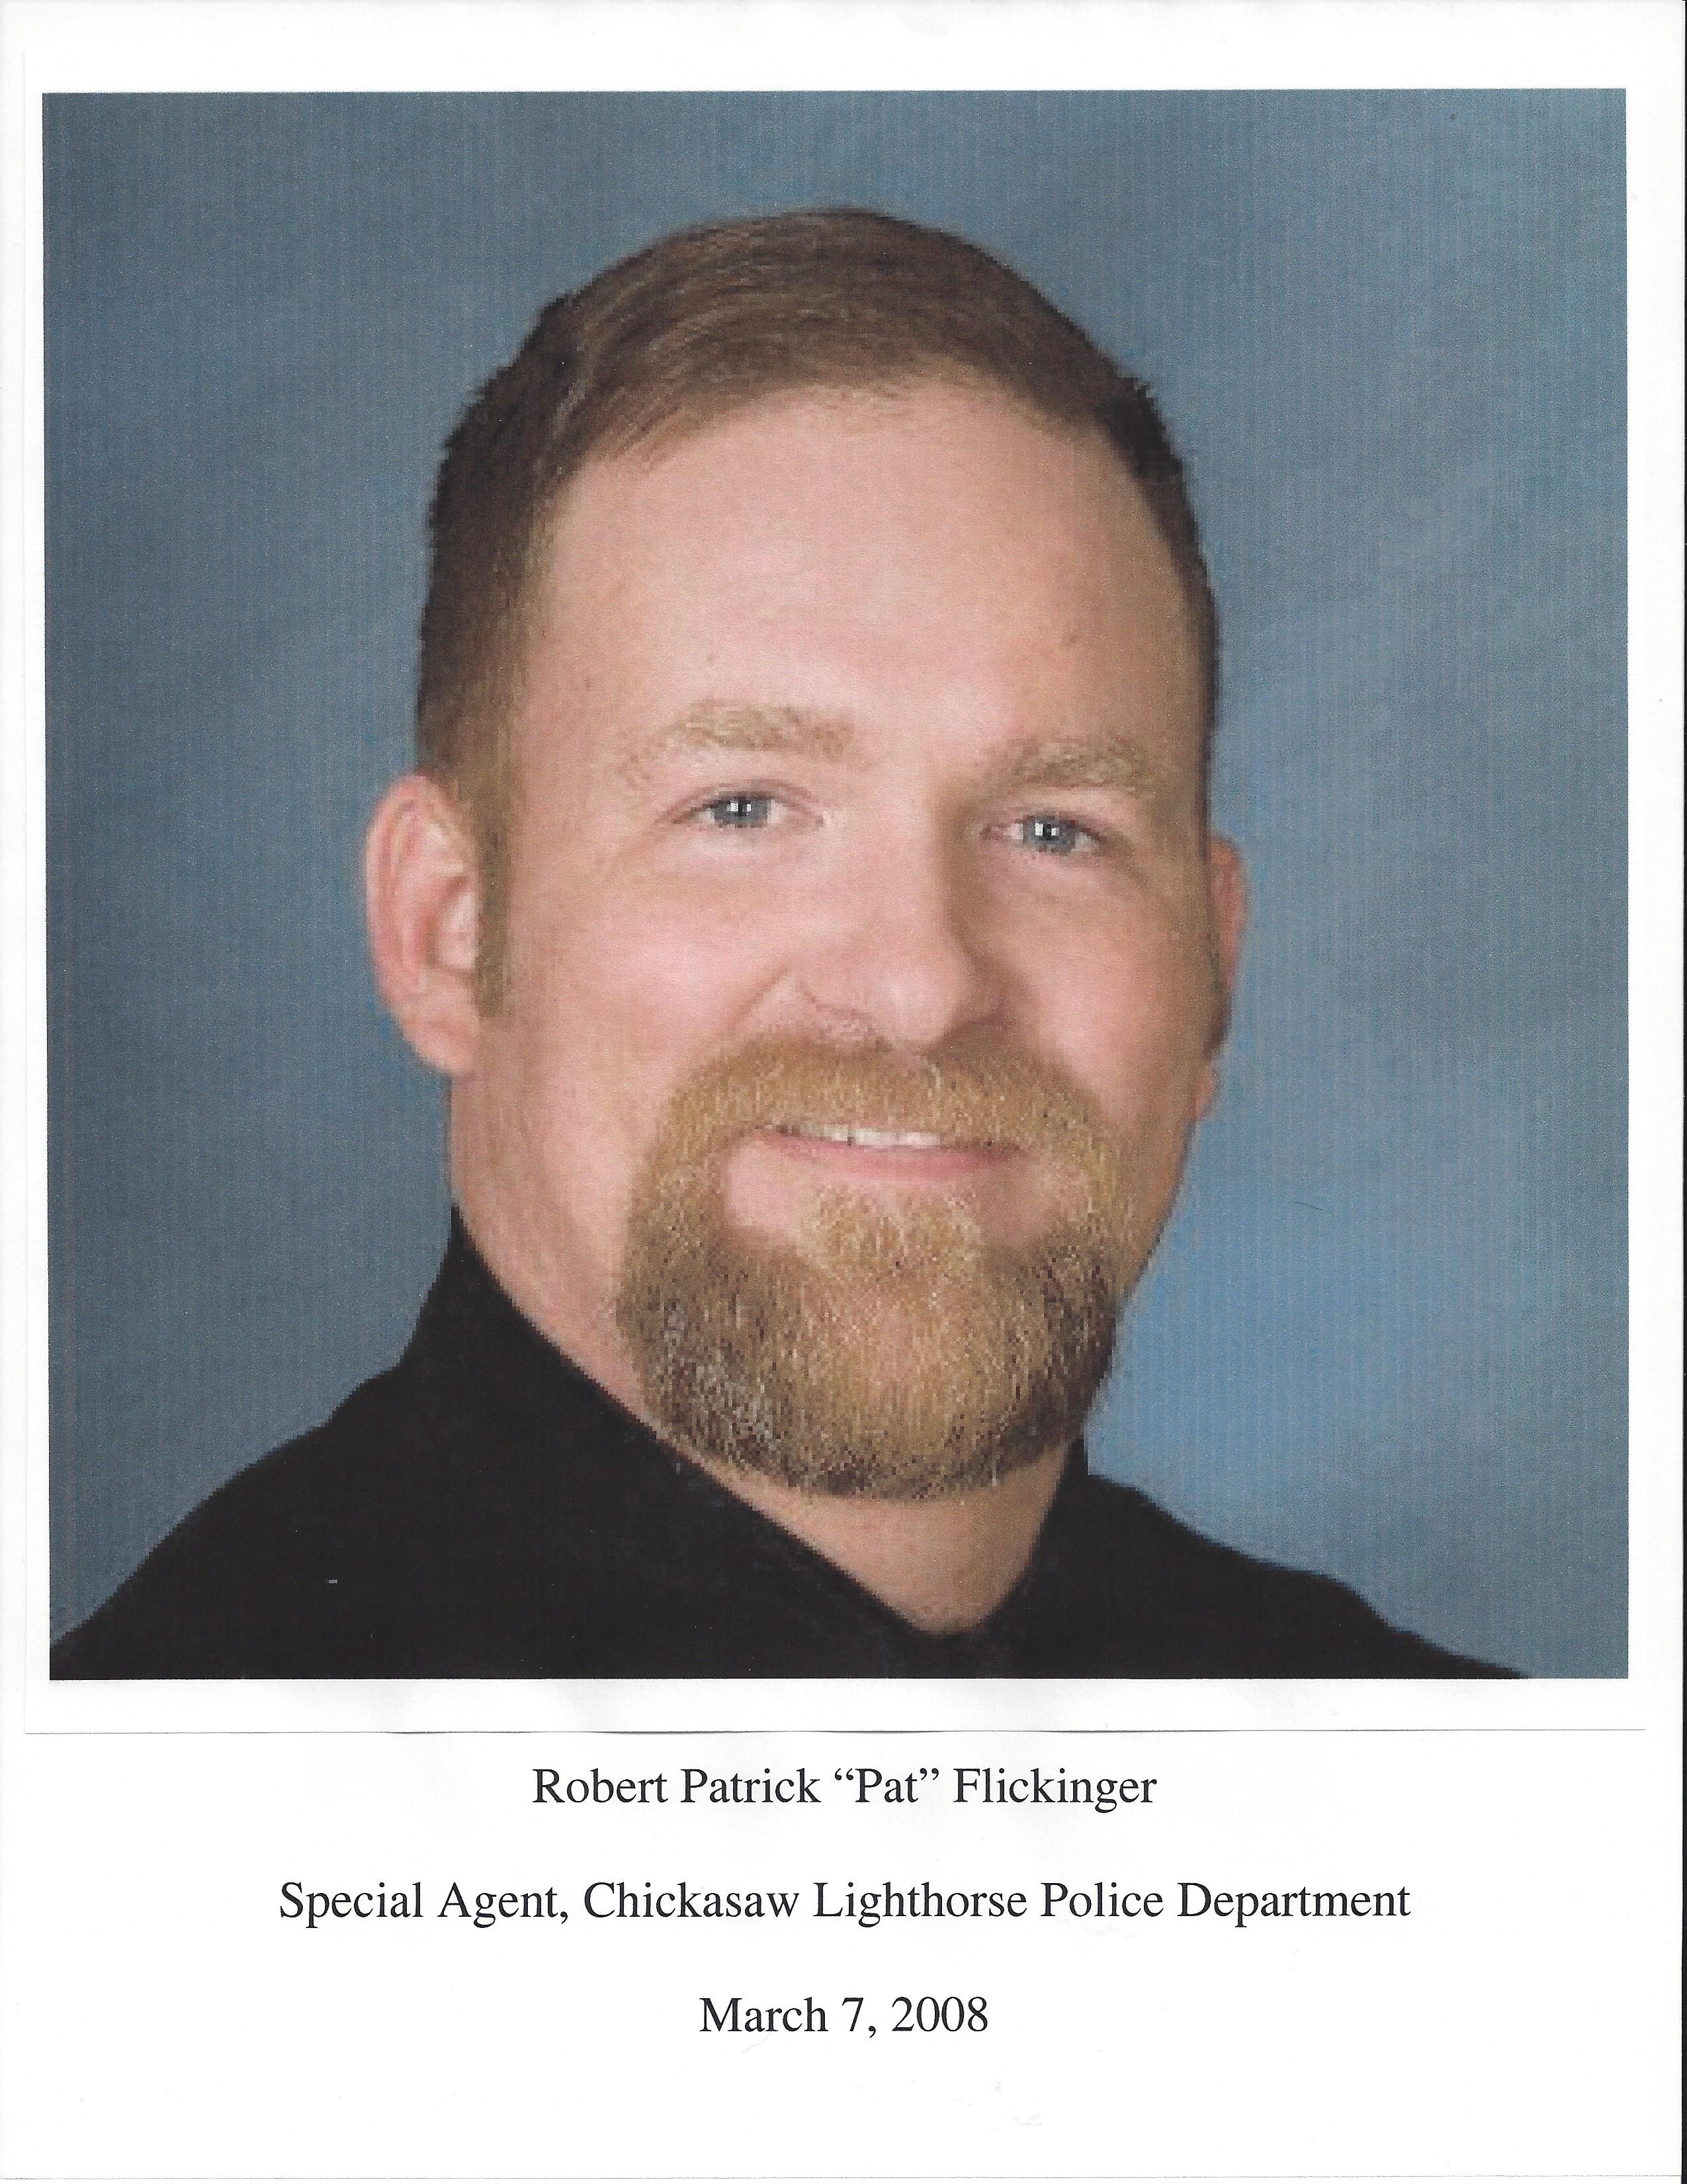 Special Agent Robert Patrick Flickinger | Chickasaw Lighthorse Police Department, Tribal Police